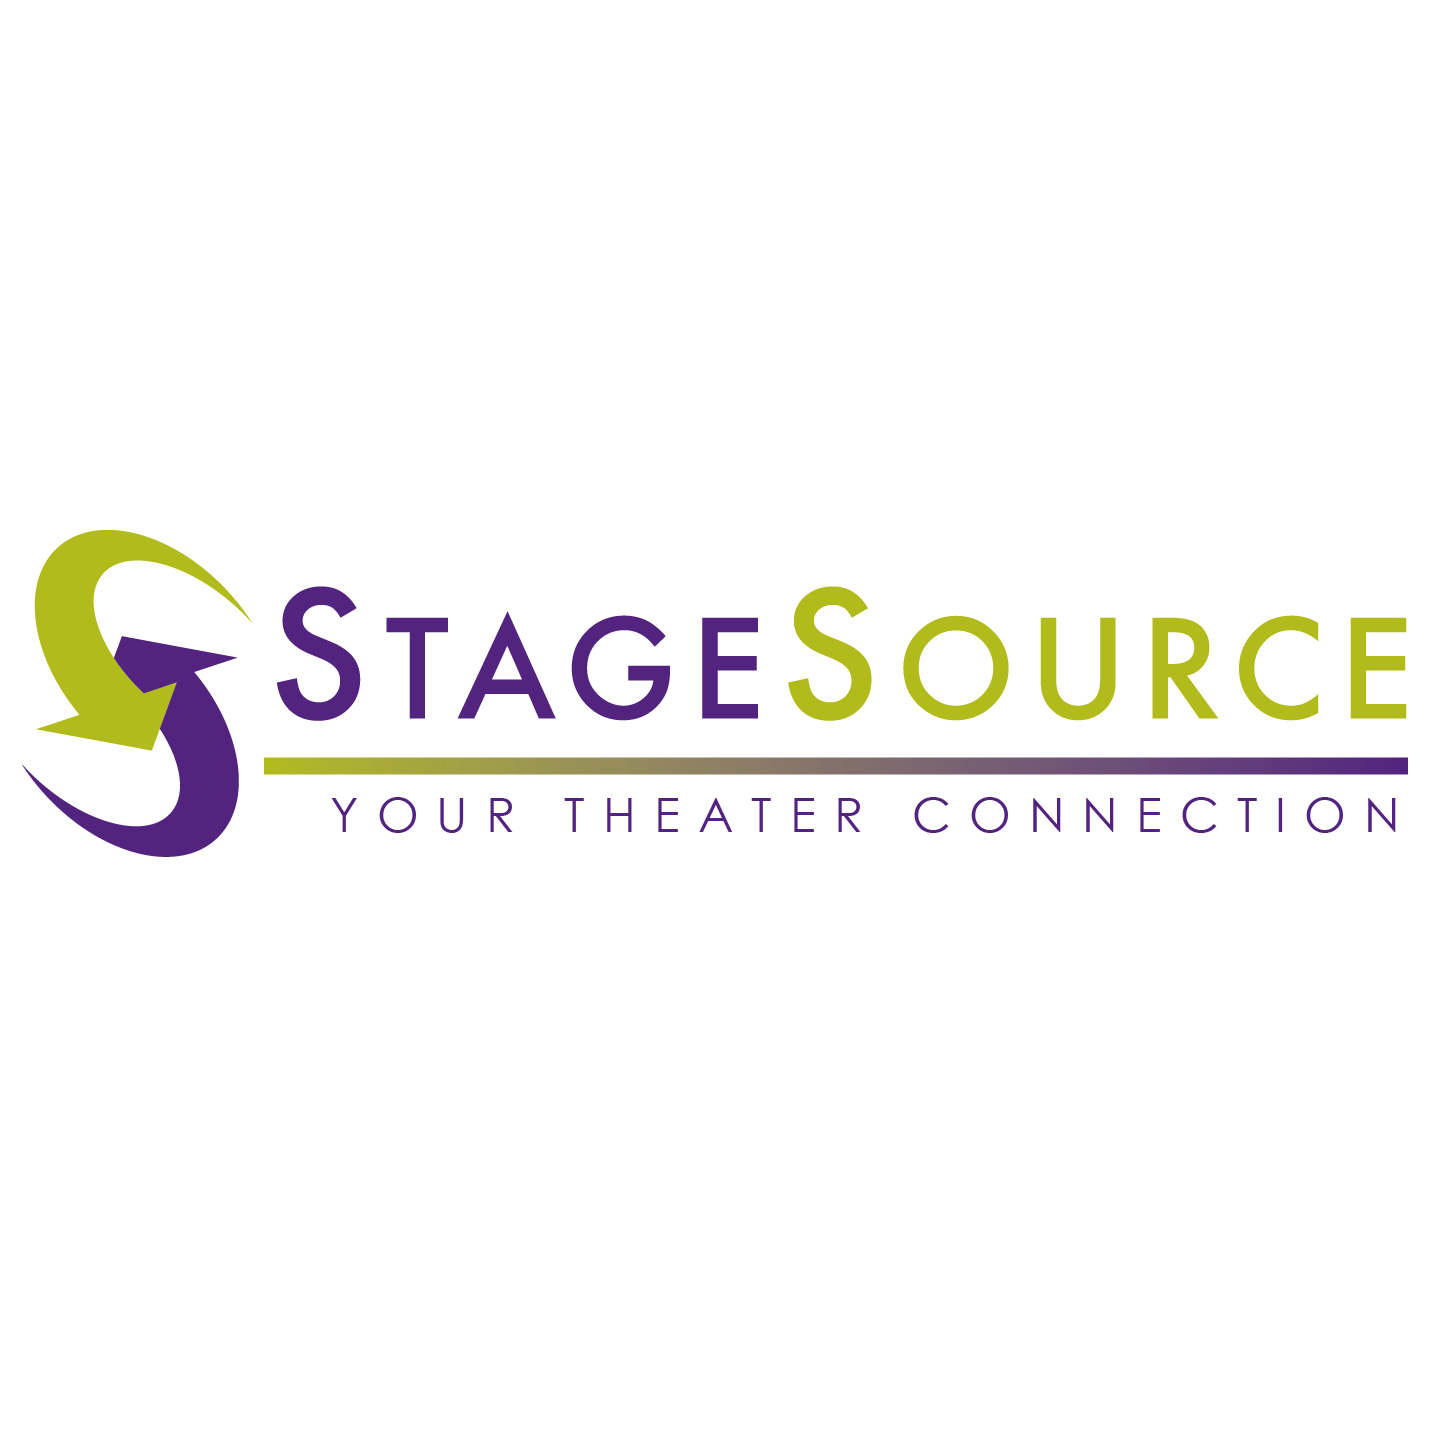 stagesource logo